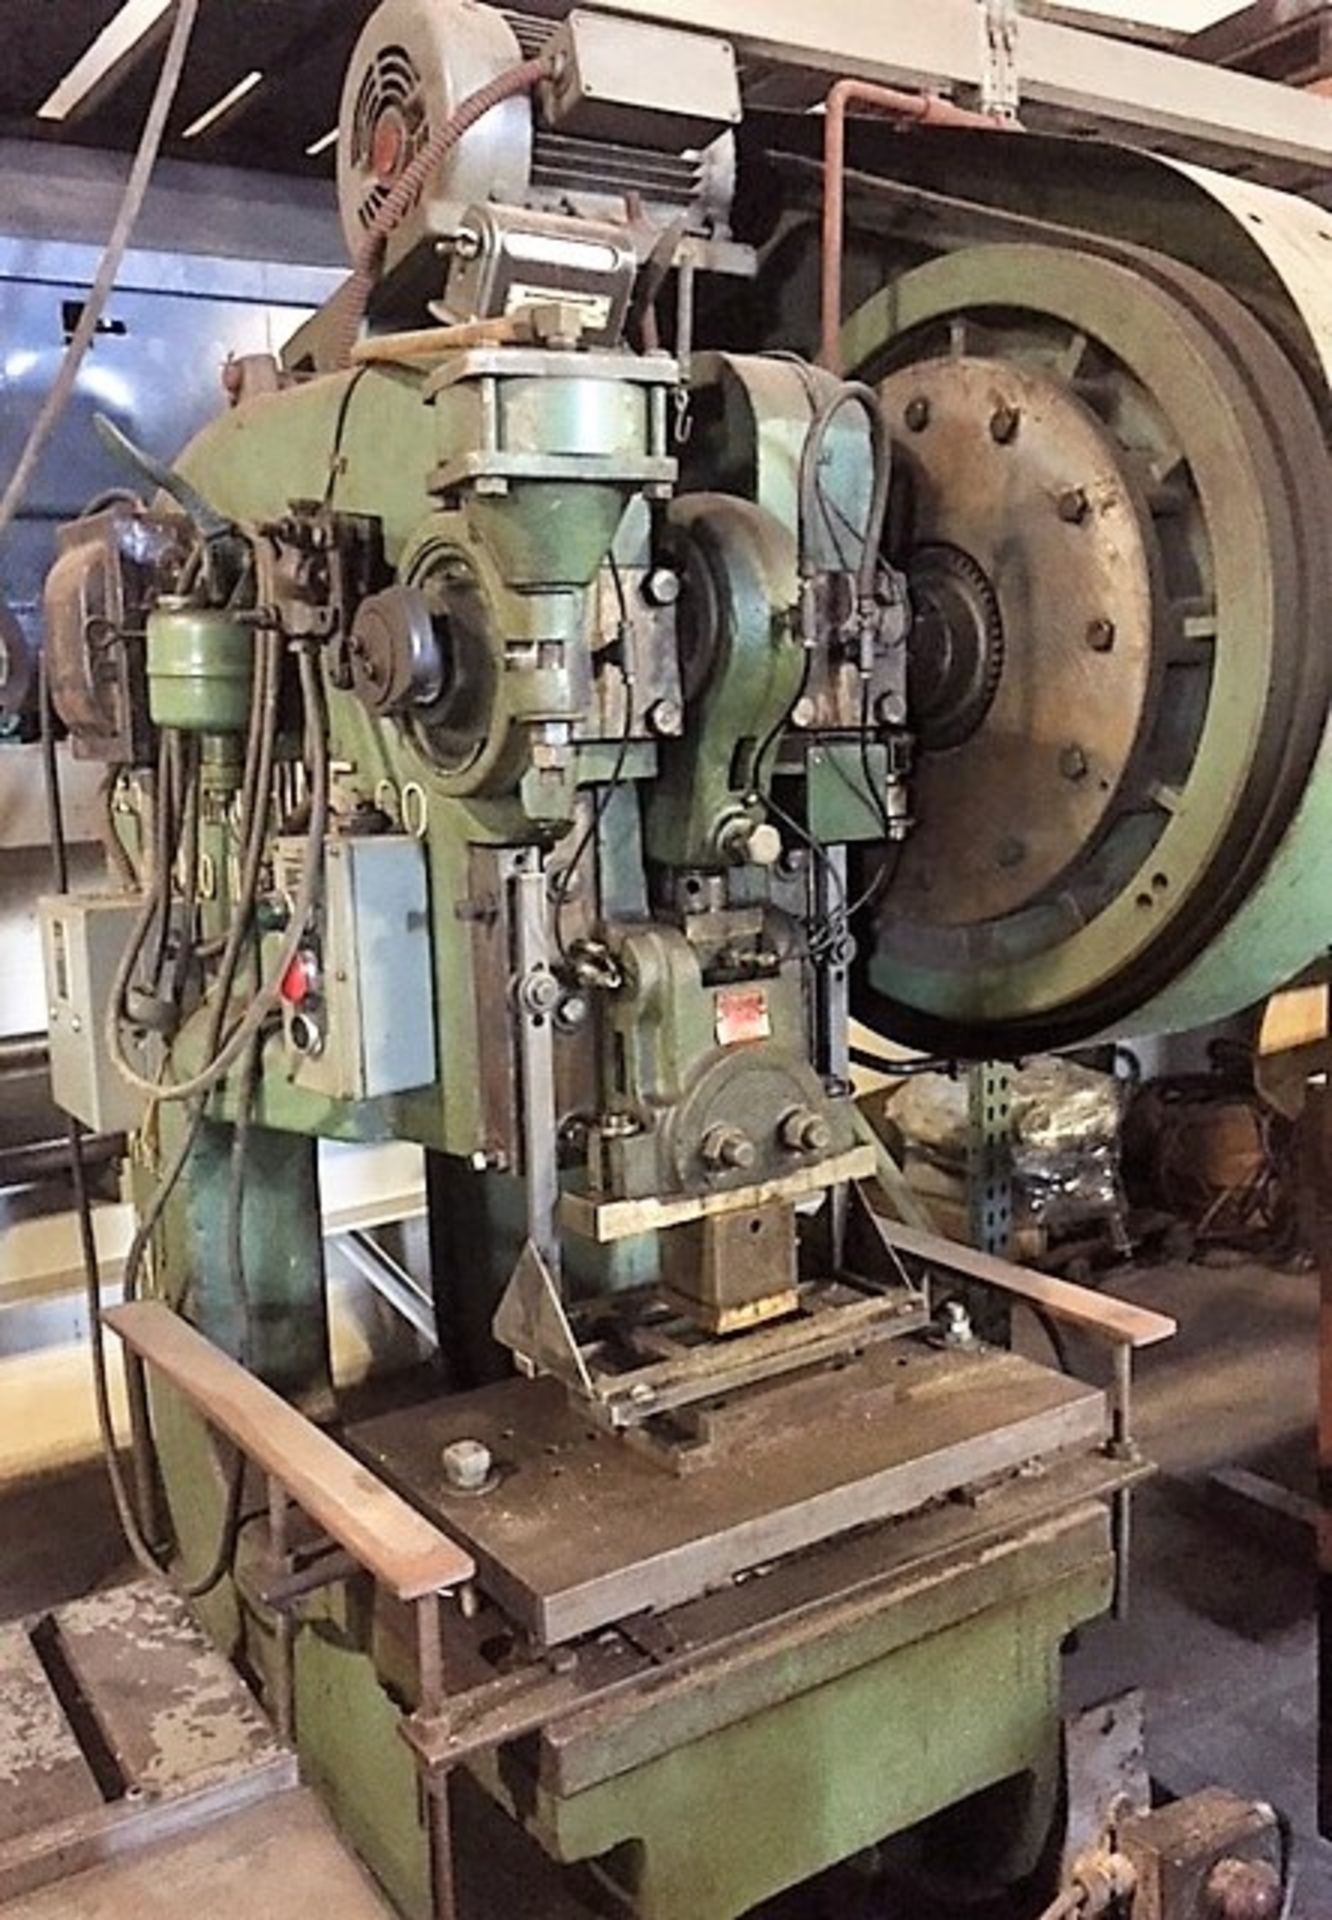 Rousselle Mdl. 3F 25-Ton Capacity OBI Press, S/N: DFSA-10871 (Located in Ronkonkoma, NY)